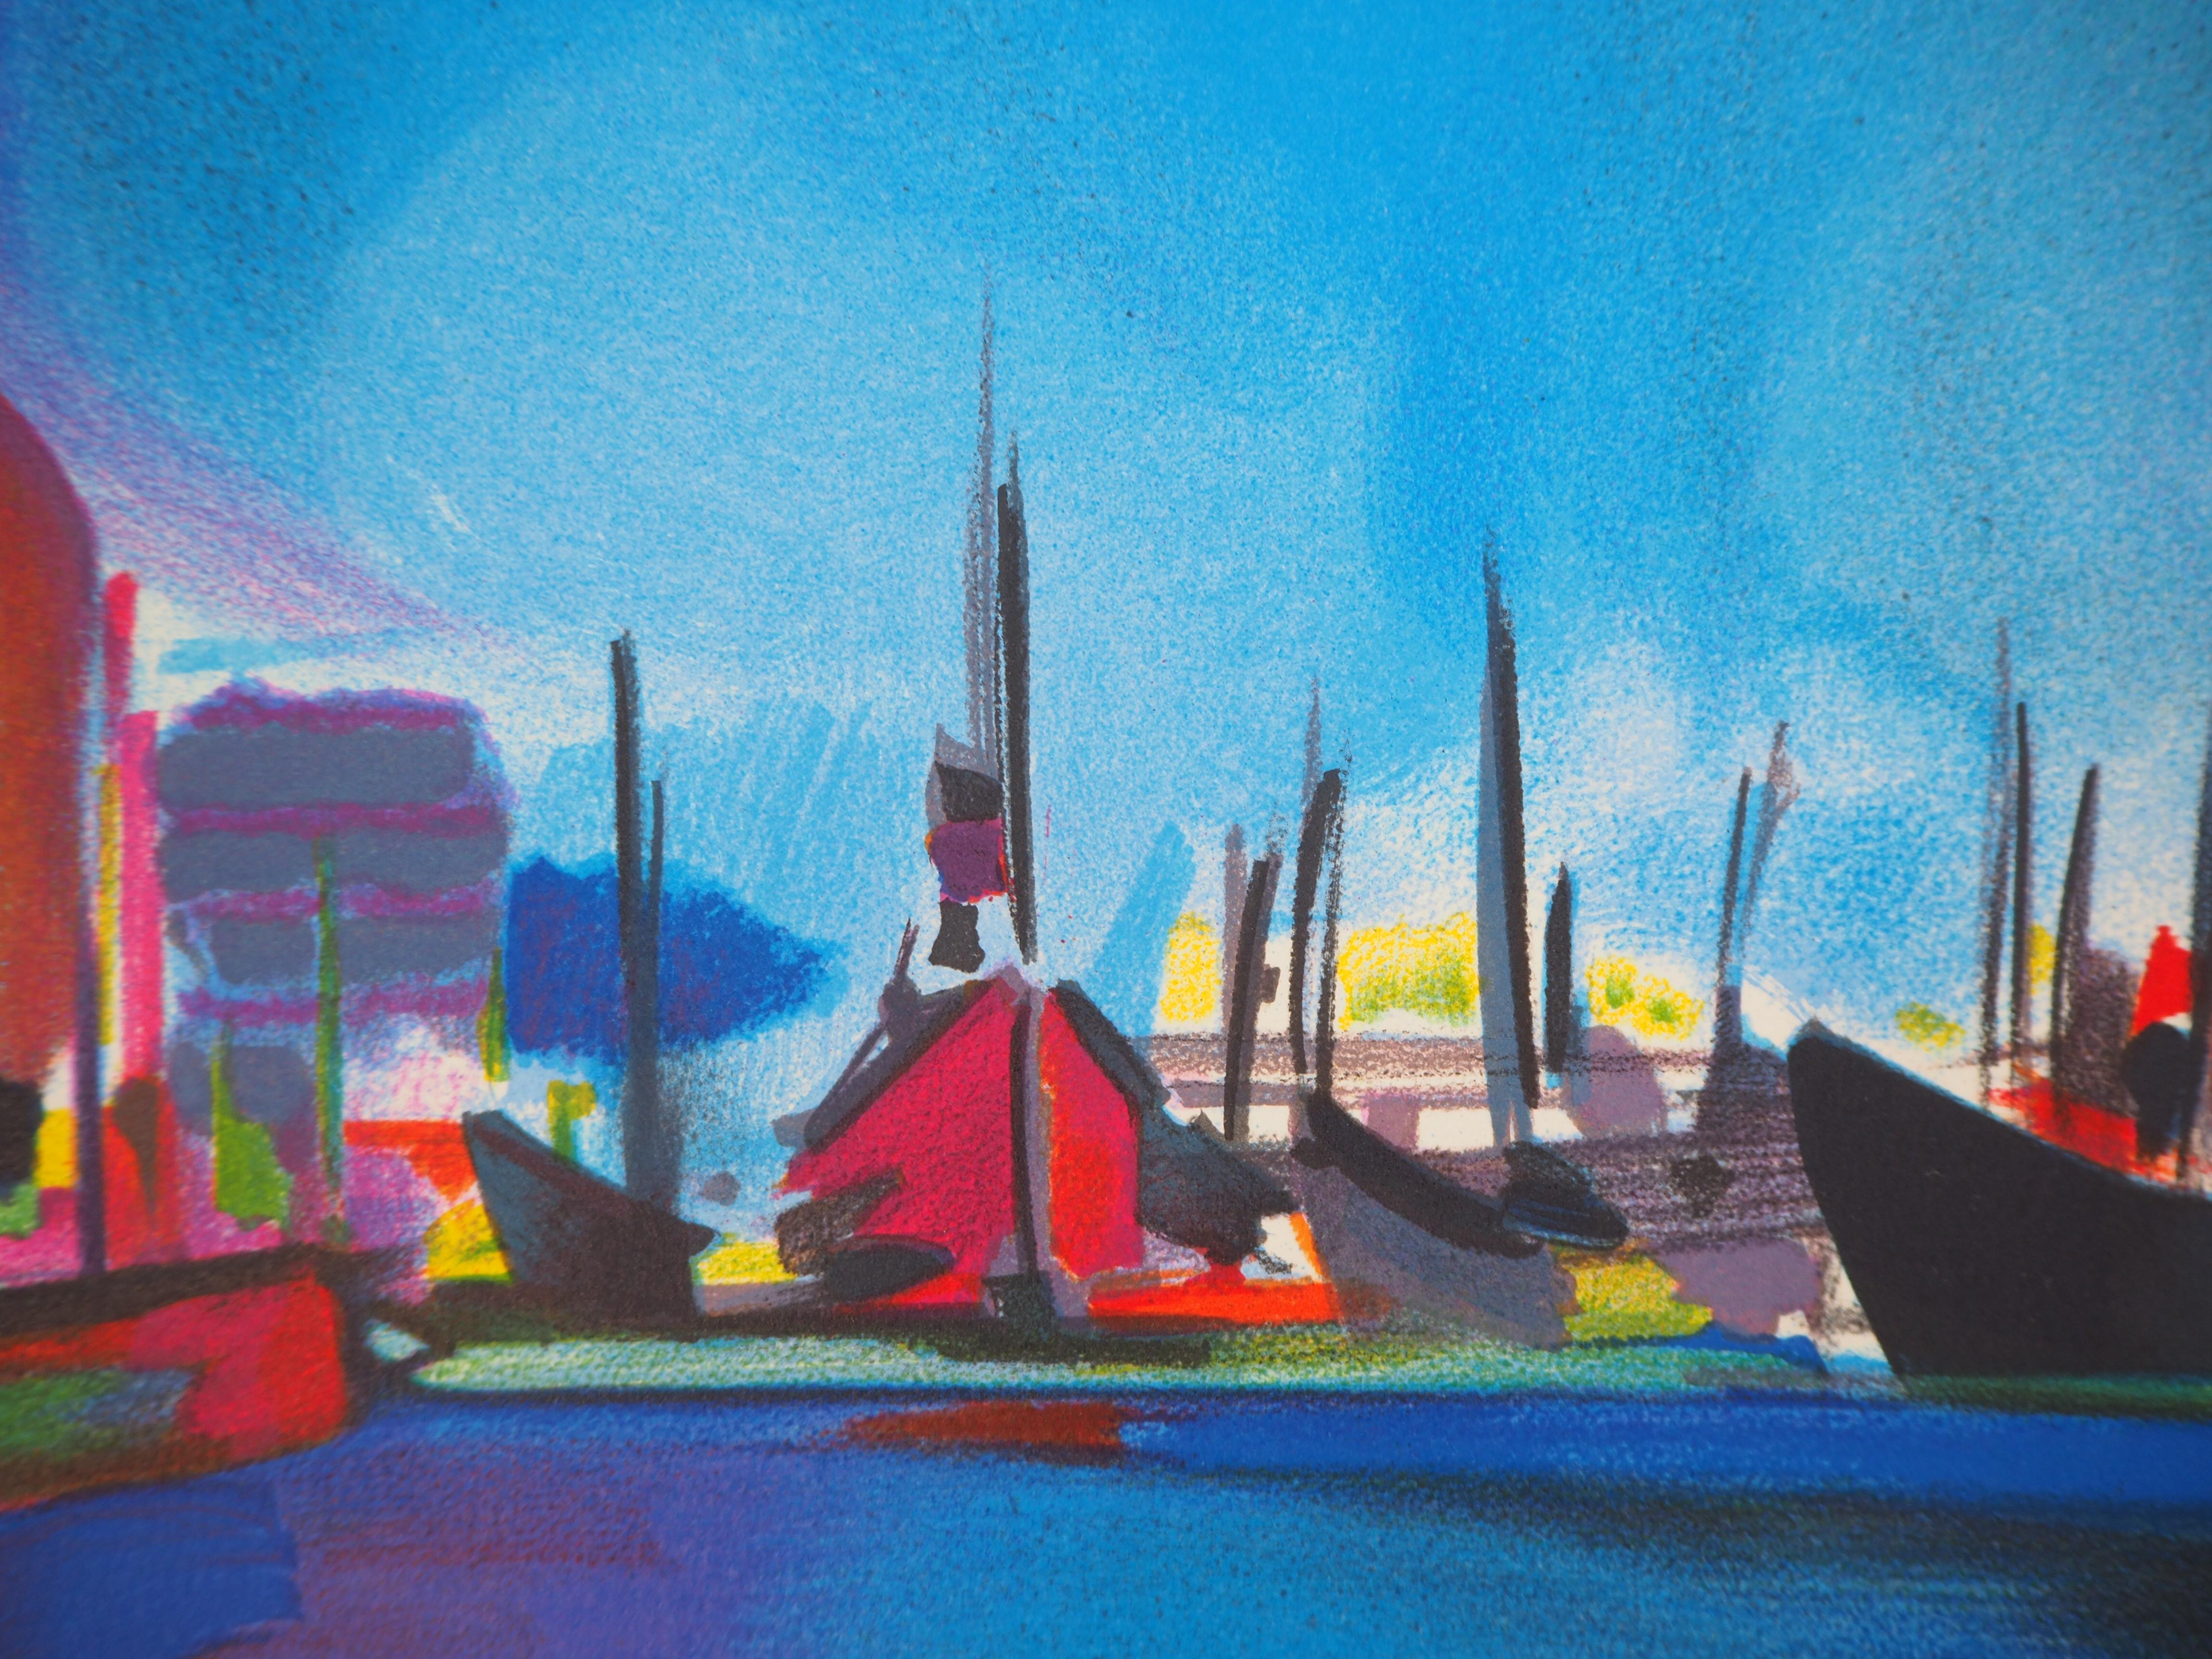 Sunset on the Harbor - Original lithograph - Modern Print by Marcel Mouly